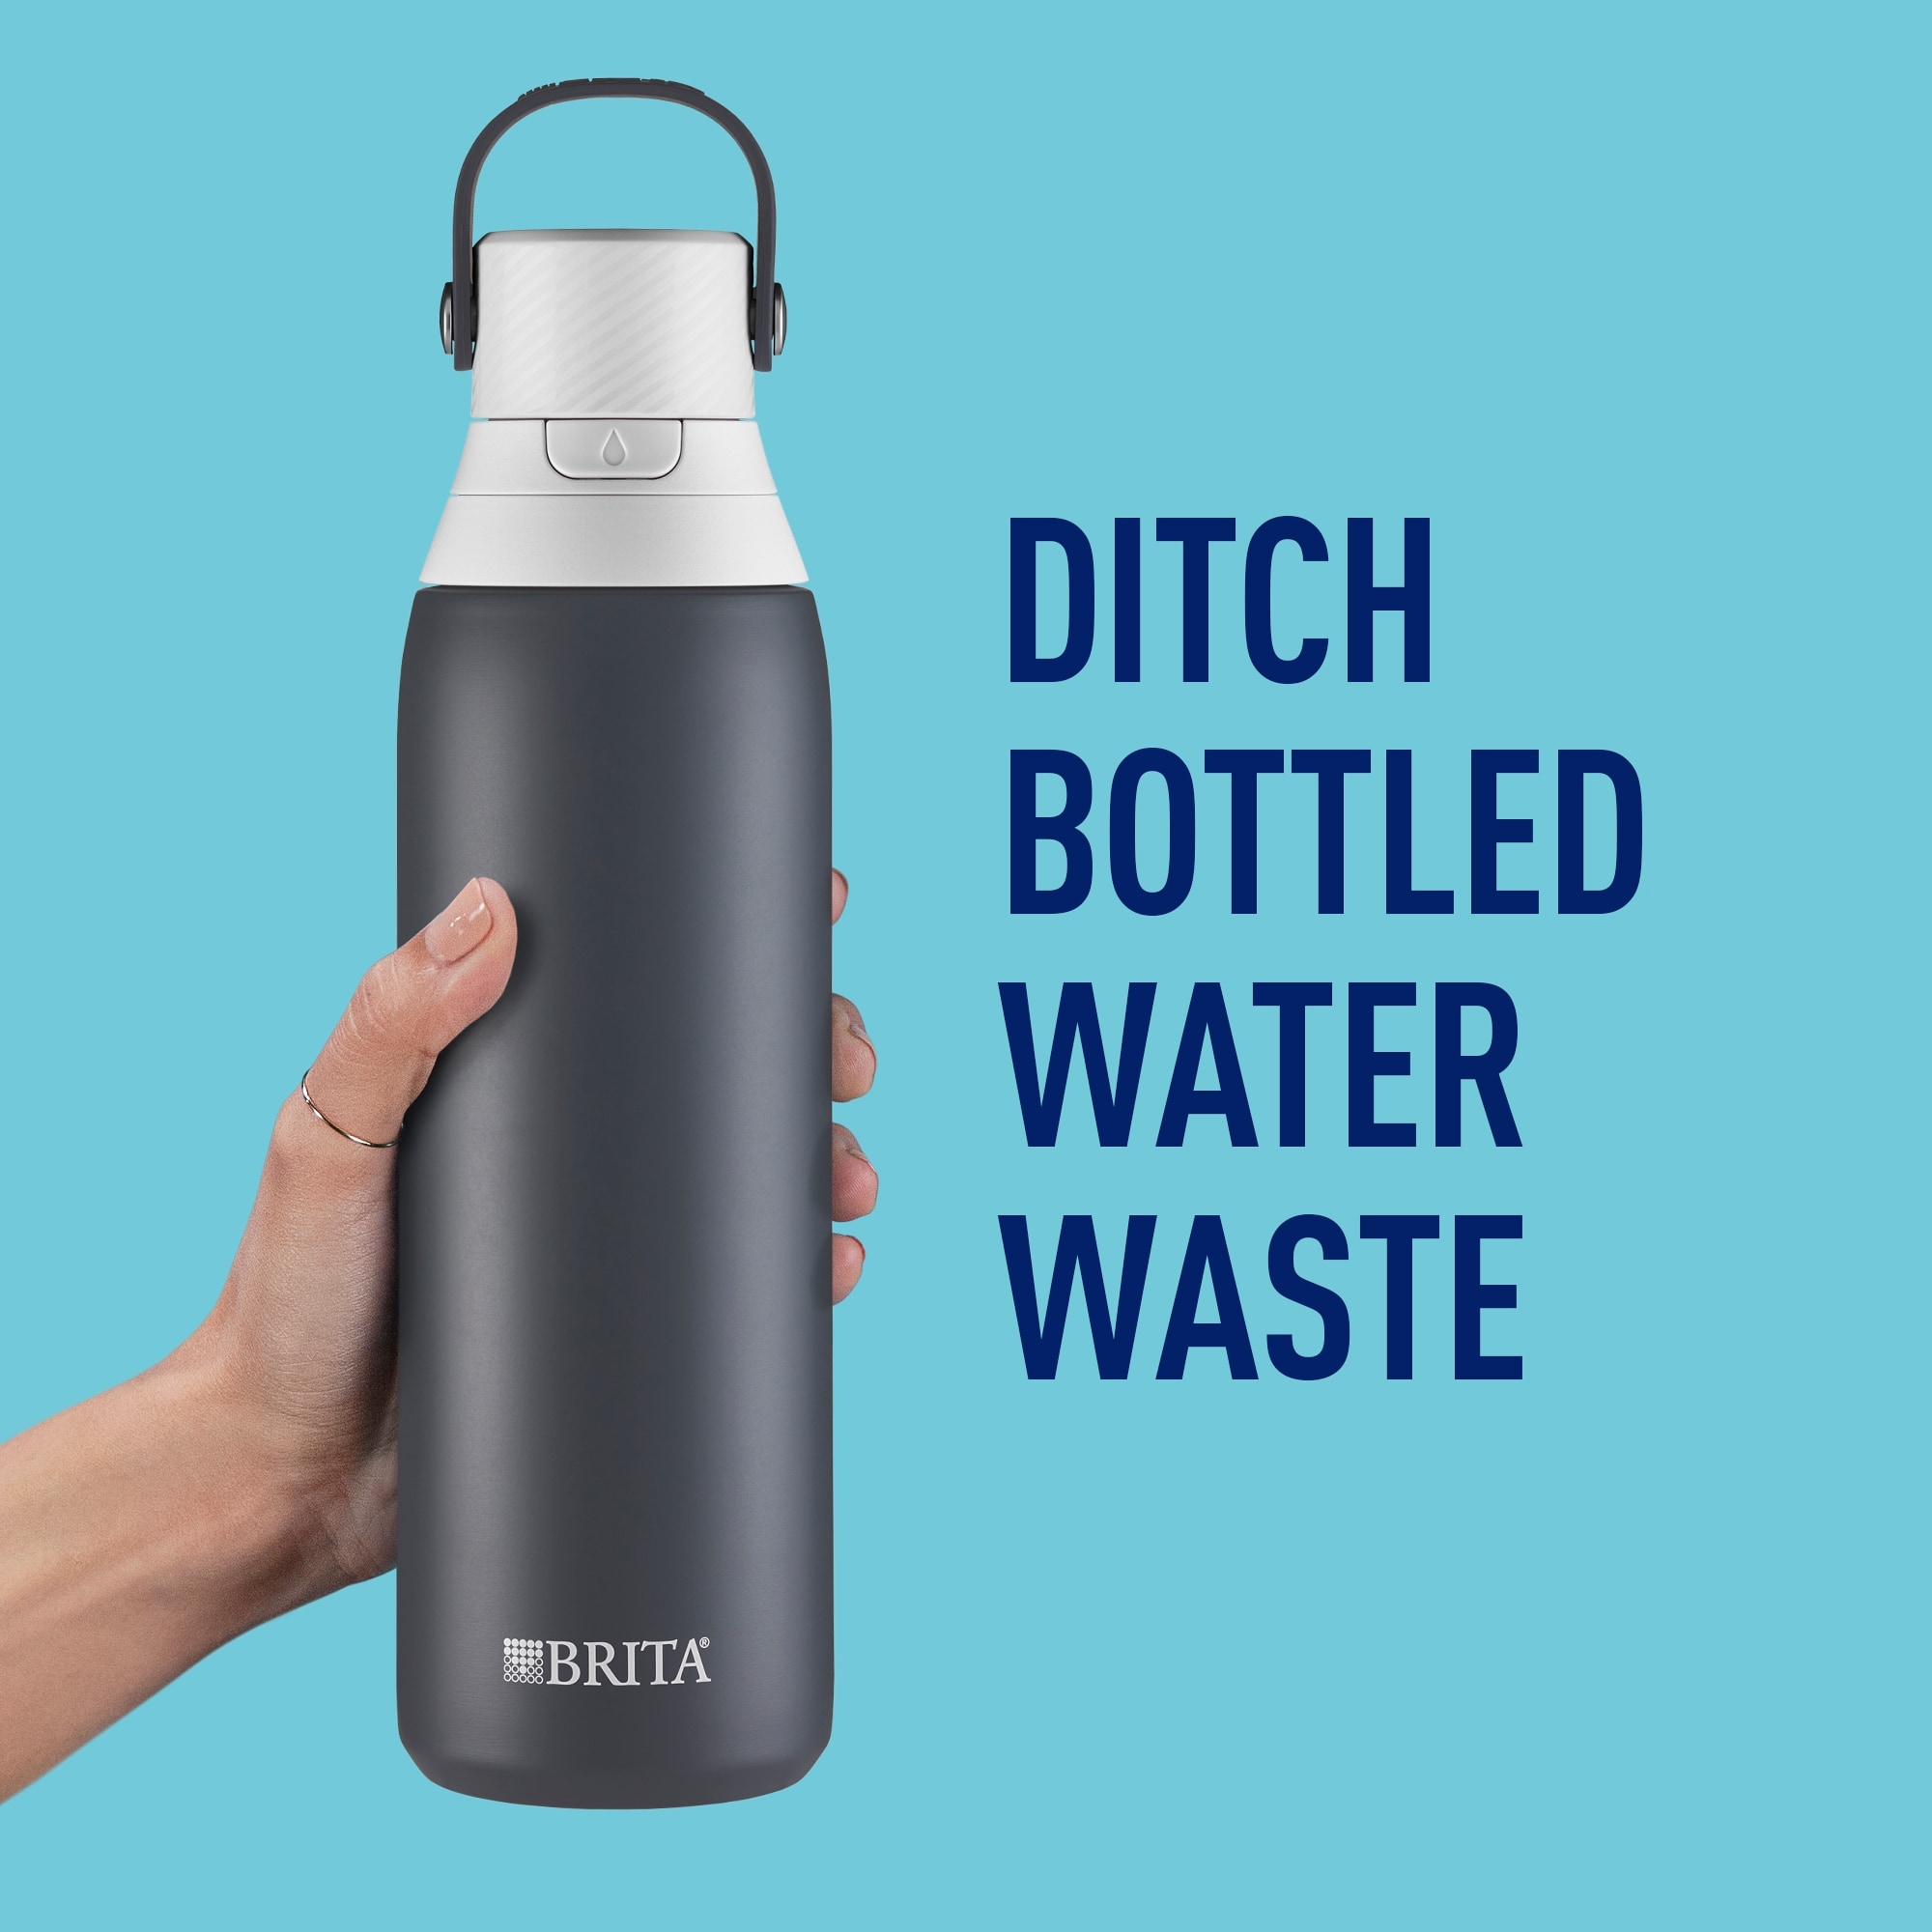 Brita 20oz Premium Double-Wall Stainless Steel Insulated Filtered